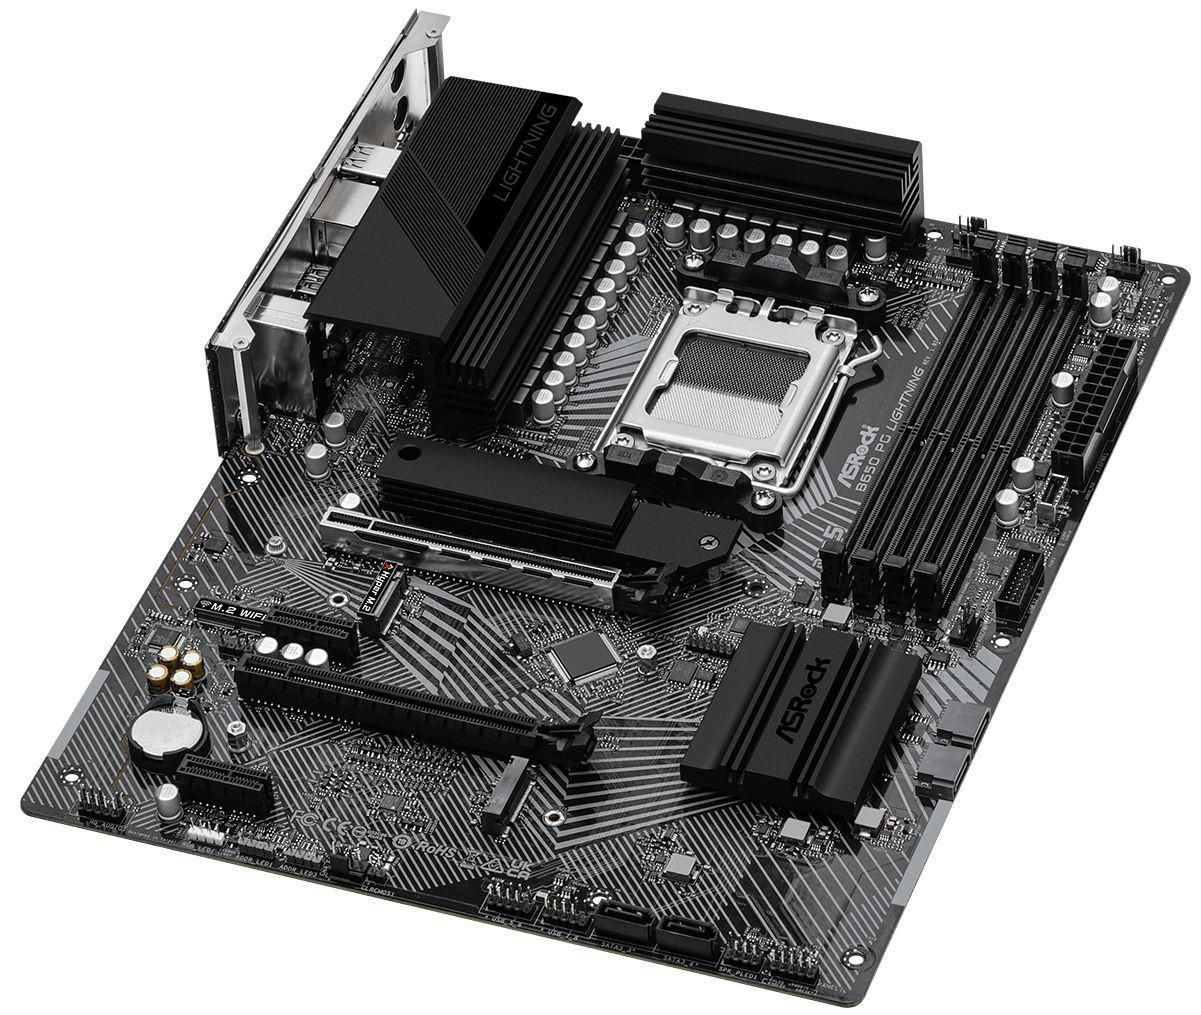 Placa de baza AsRock B650 PG Lightning AM5  Supports AMD Ryzen™ 7000 Series Processors 14+2+1 Phase Power Design, SPS 4 x DDR5 DIMMs, supports up to 6400+(OC) 1 PCIe 4.0 x16, 1 PCIe 4.0 x16, 2 PCIe 4.0 x1, 1 M.2 Key-E for WiFi Graphics Output Options: 1 HDMI 7.1 CH HD Audio (Realtek ALC897 Audio_3